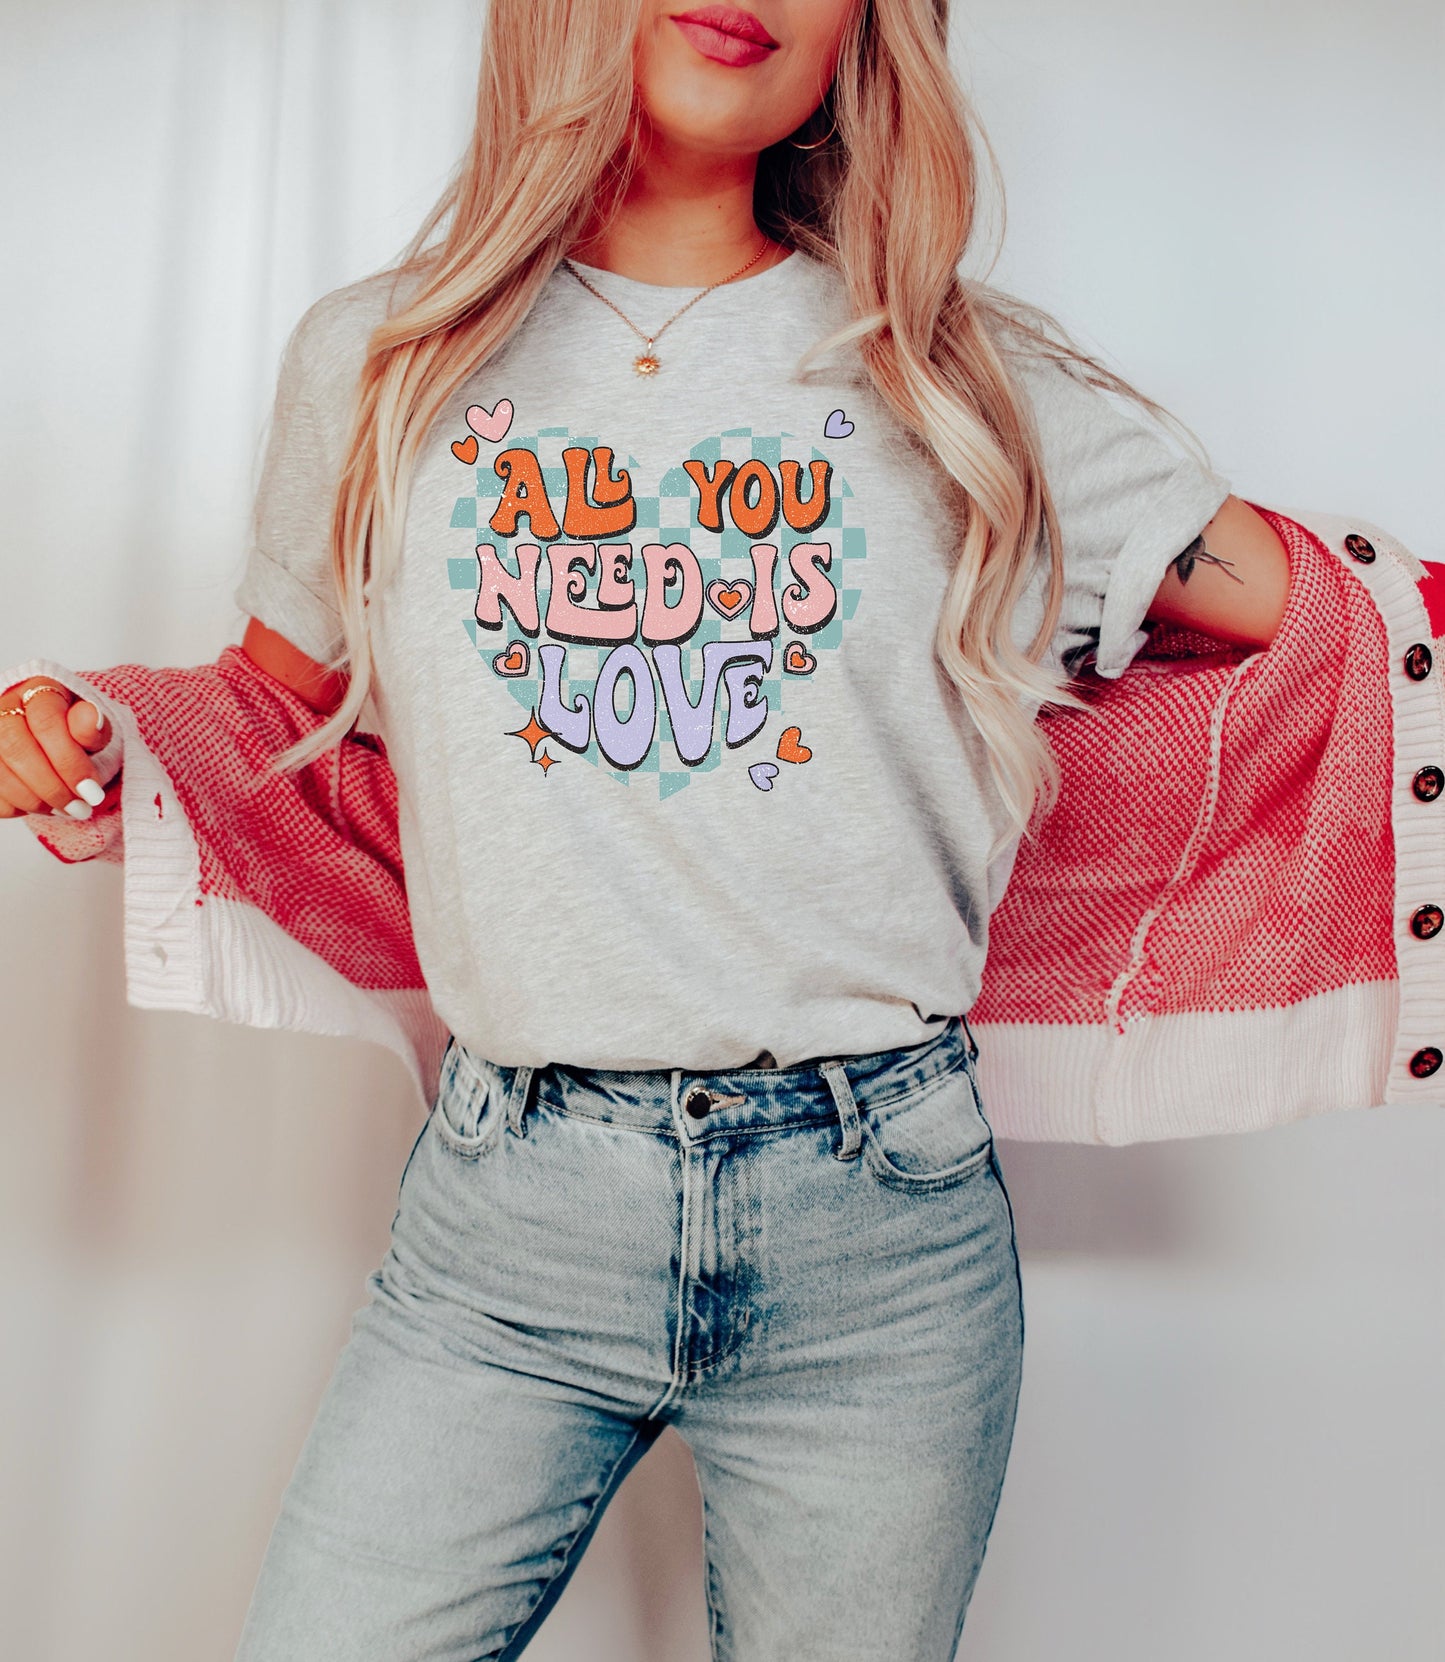 All you need is love Shirt, Valentines day shirt, Love birds, For Women, Be Mine, Heart Shirt, Retro Valentines Day Shirt, XOXO Shirt, Love